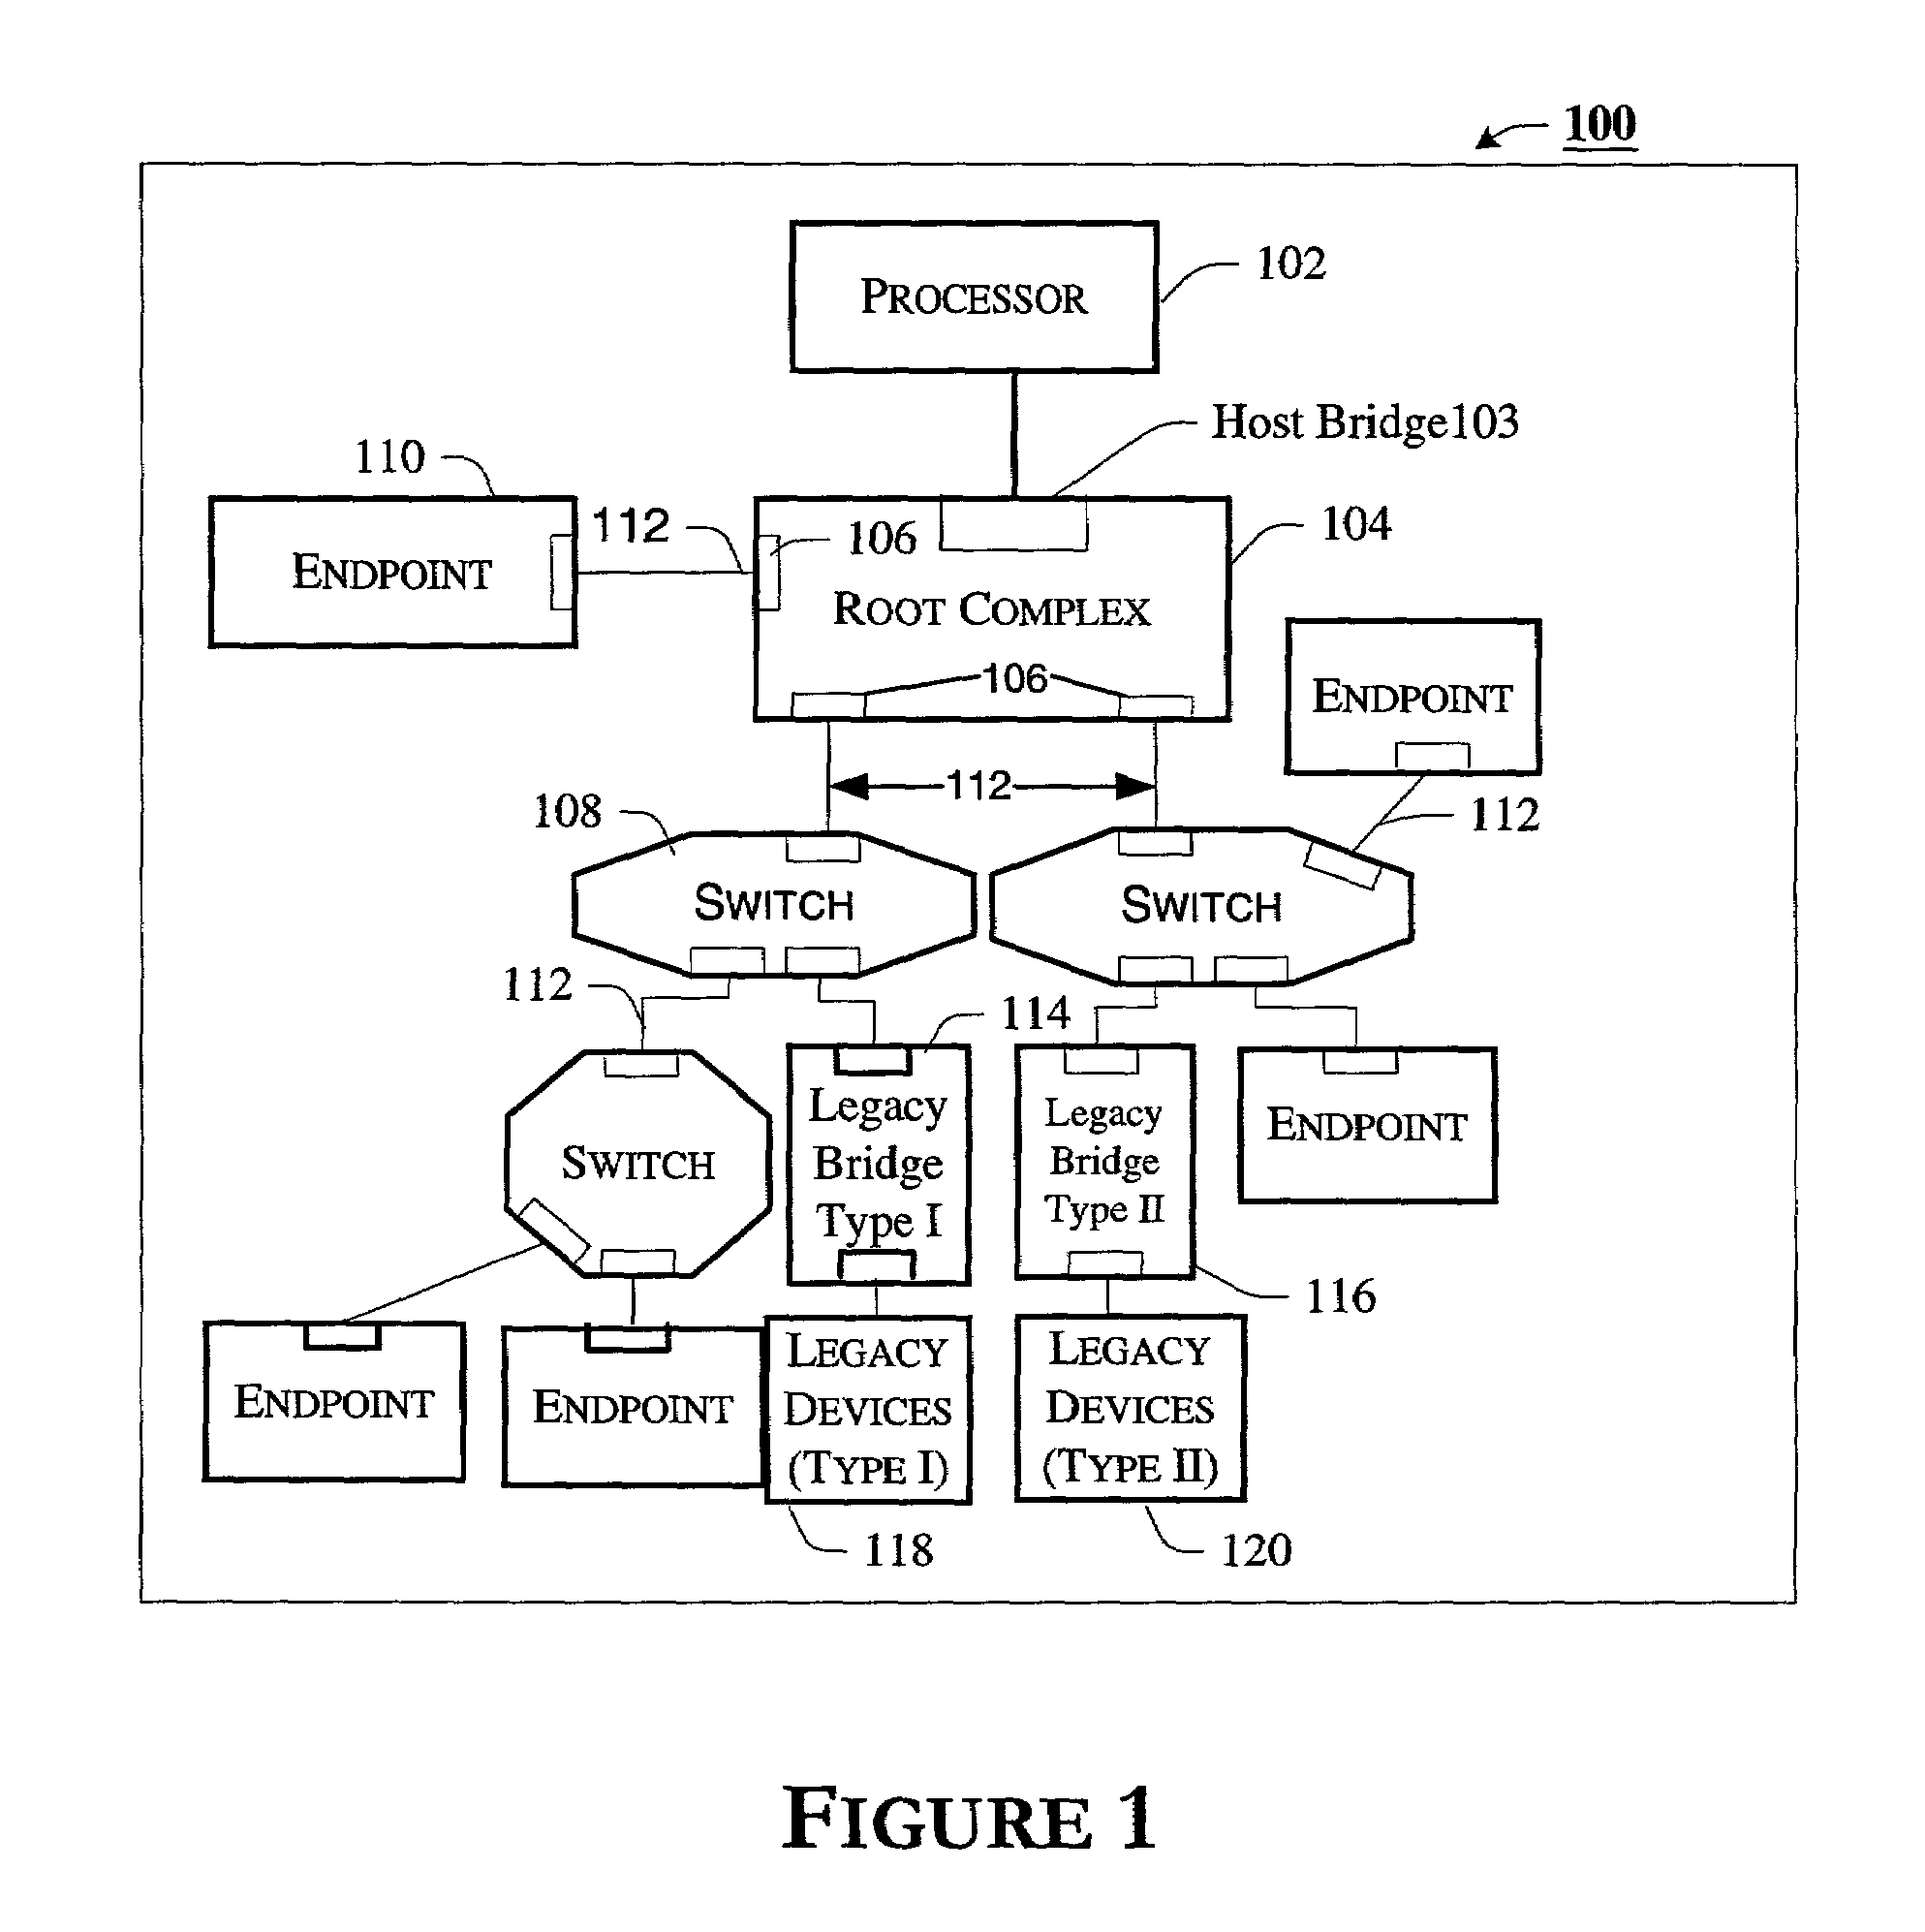 Method for handling completion packets with a non-successful completion status